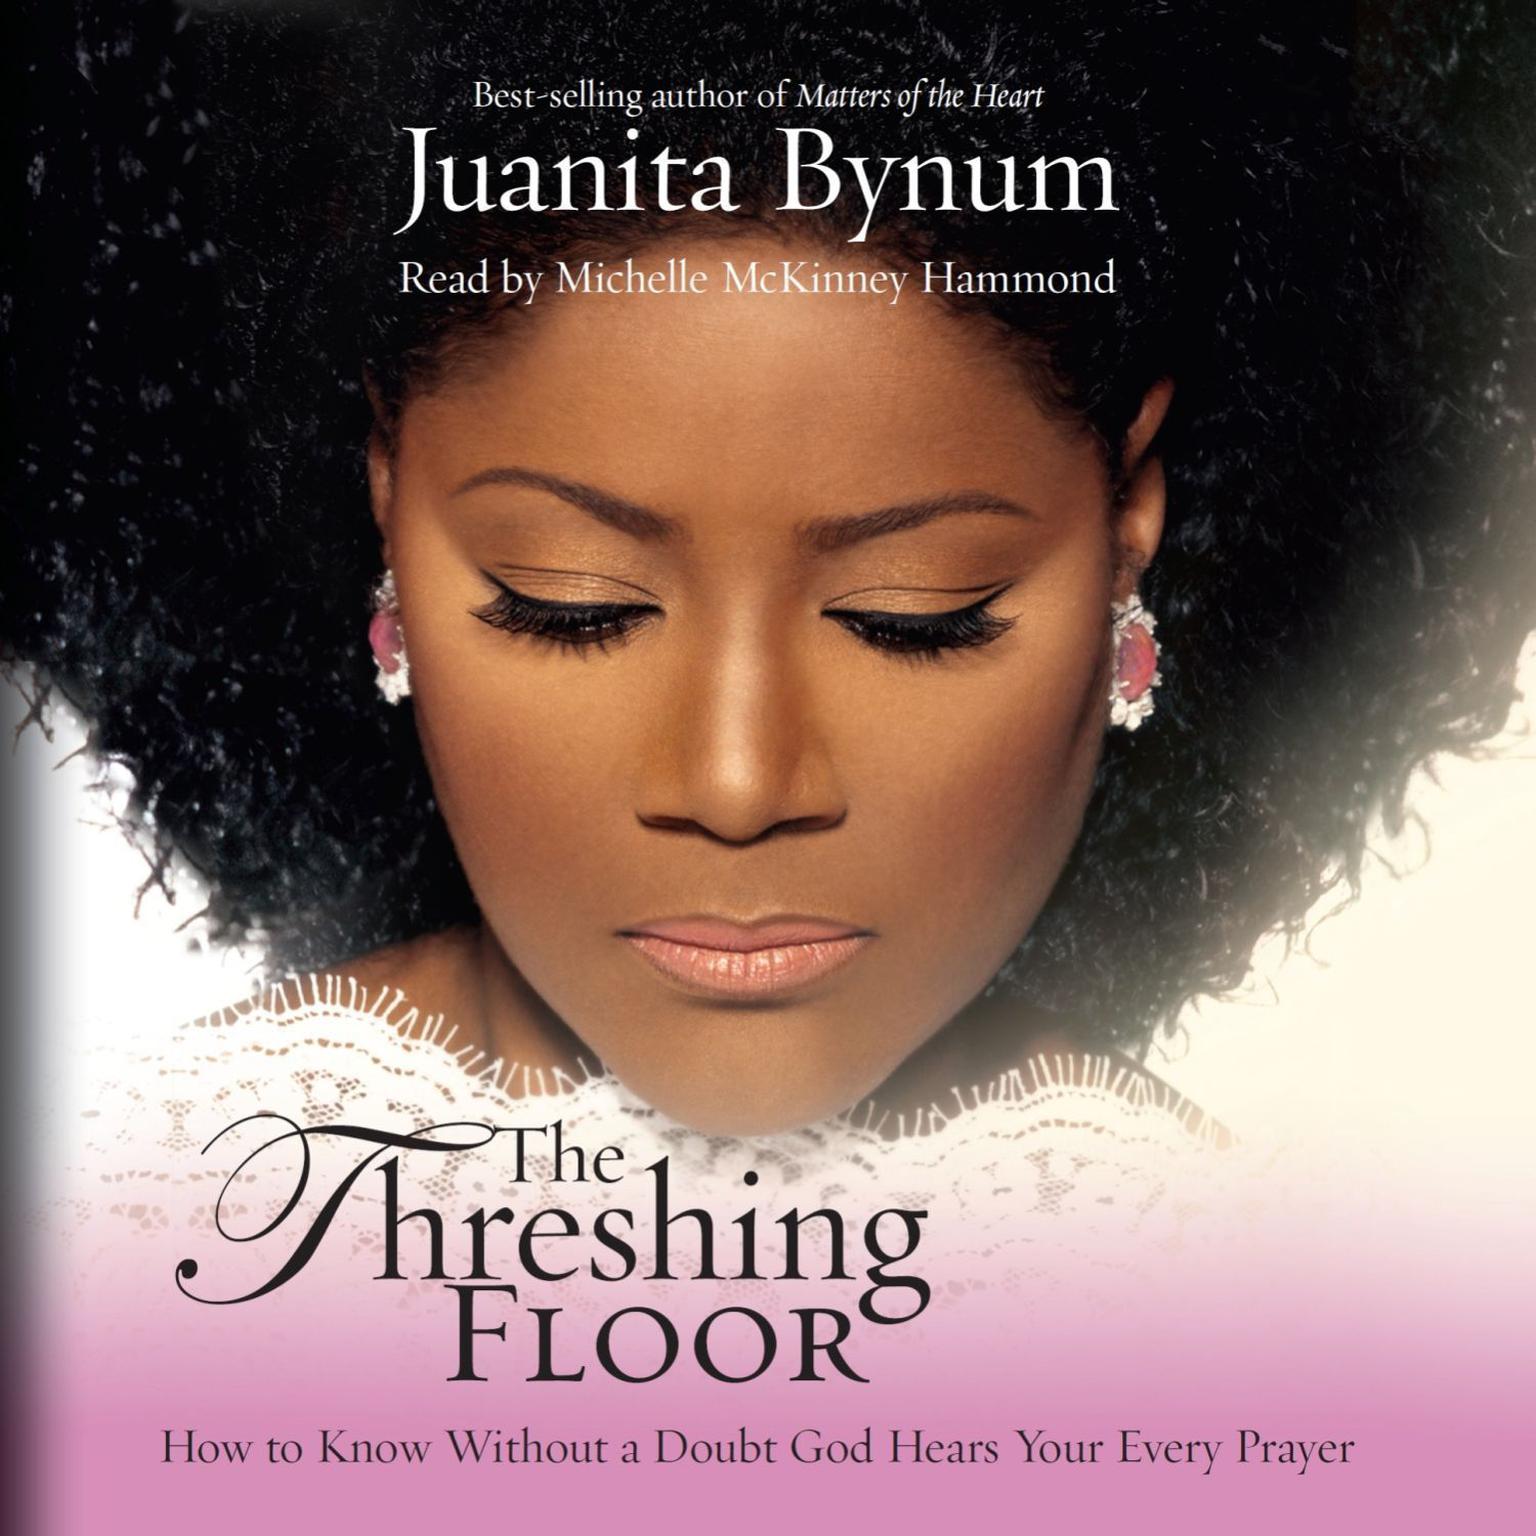 The Threshing Floor (Abridged): How to Know Without a Doubt God Hears Your Every Prayer Audiobook, by Juanita Bynum